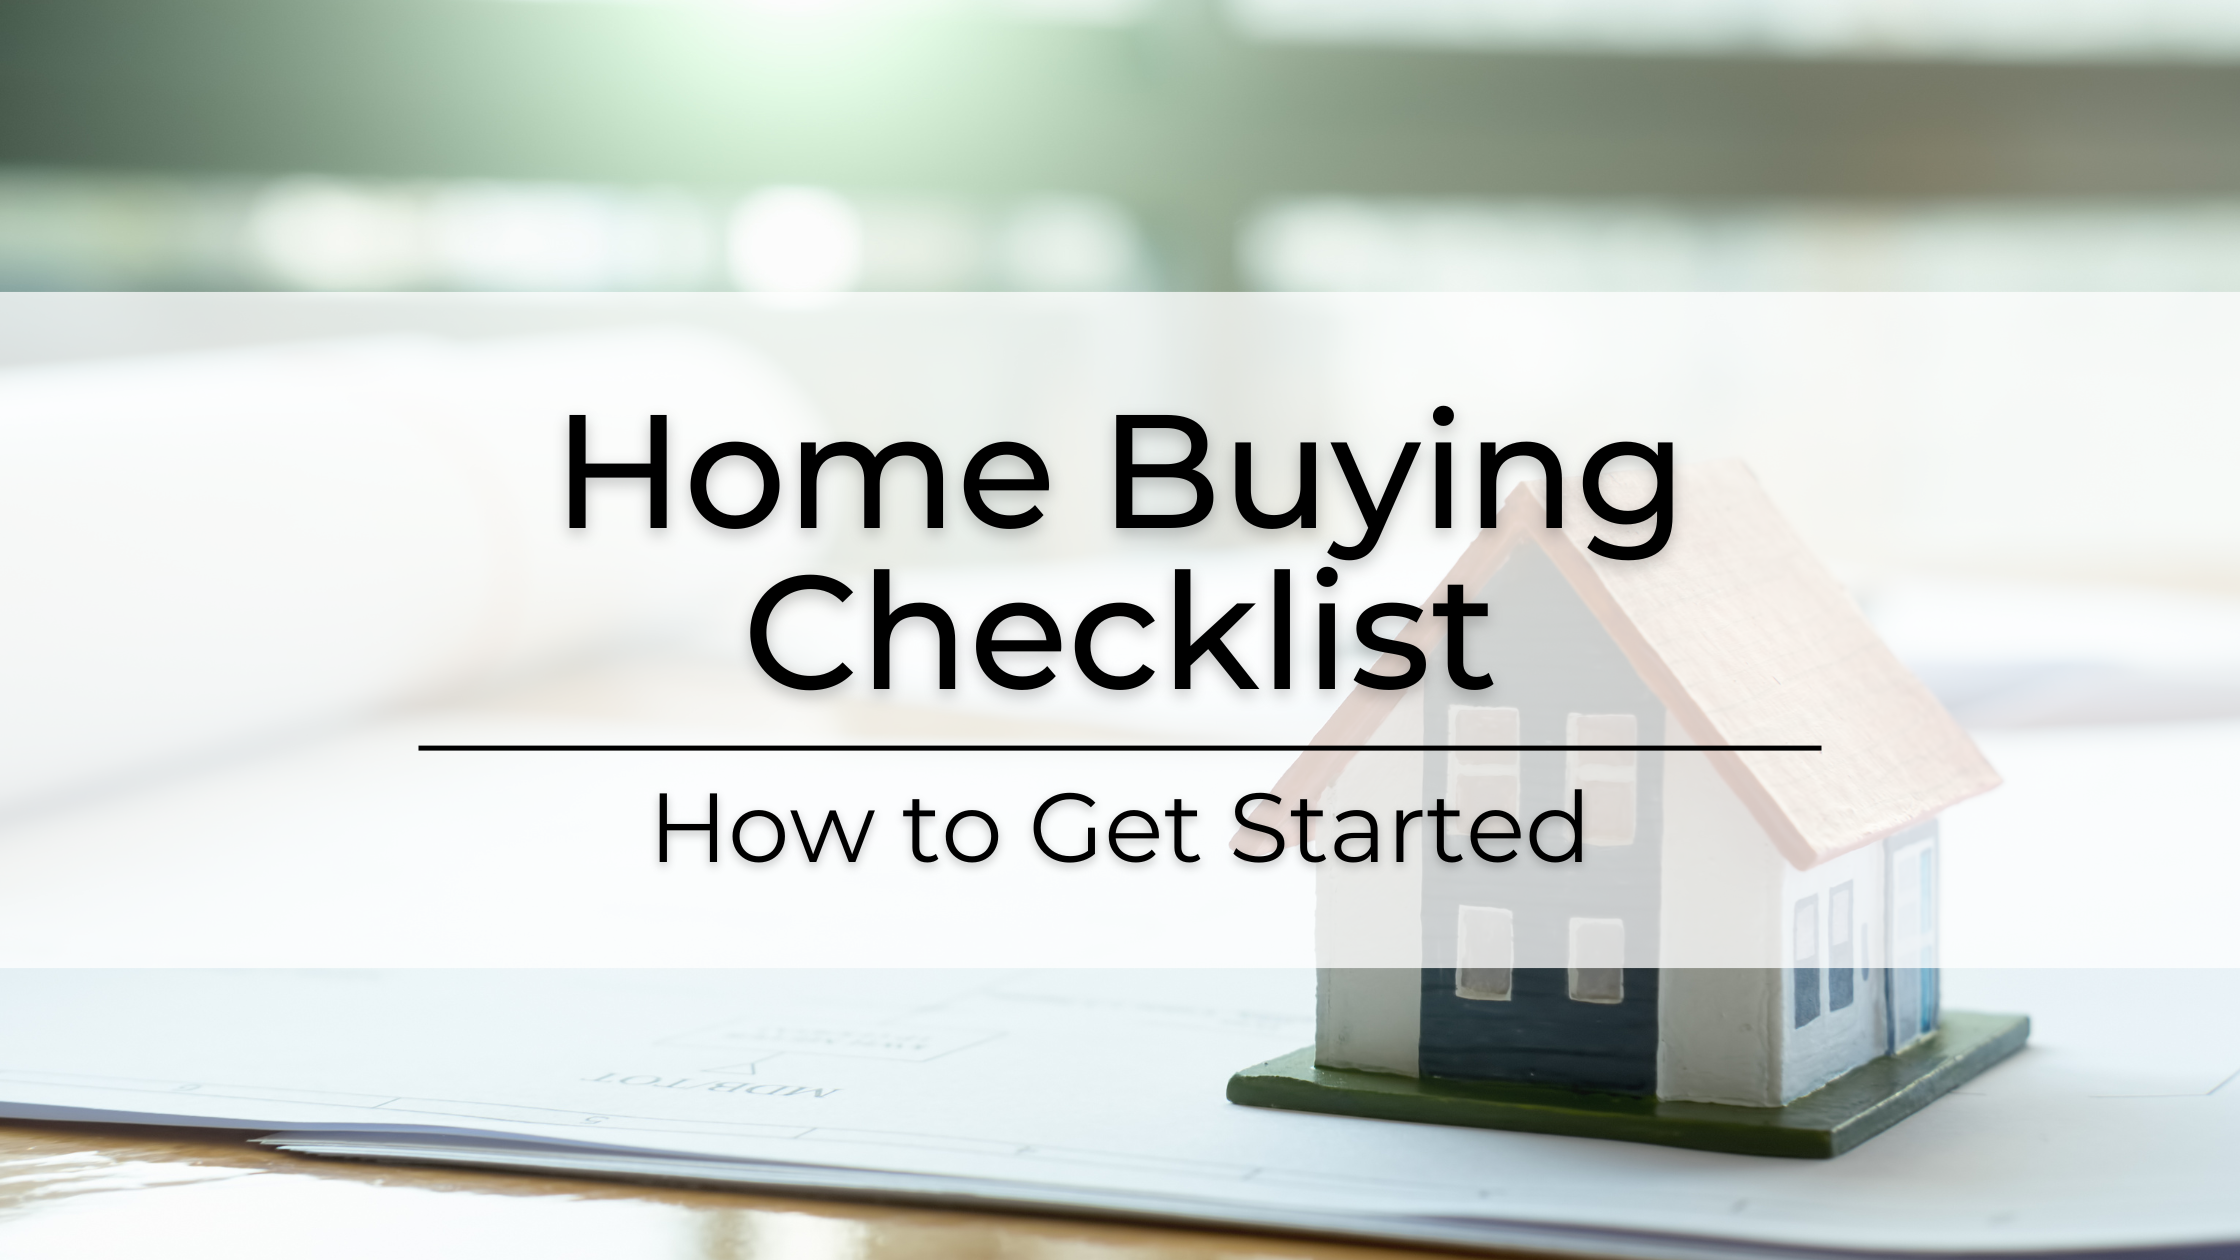 Home Buying Checklist - How to Get Started